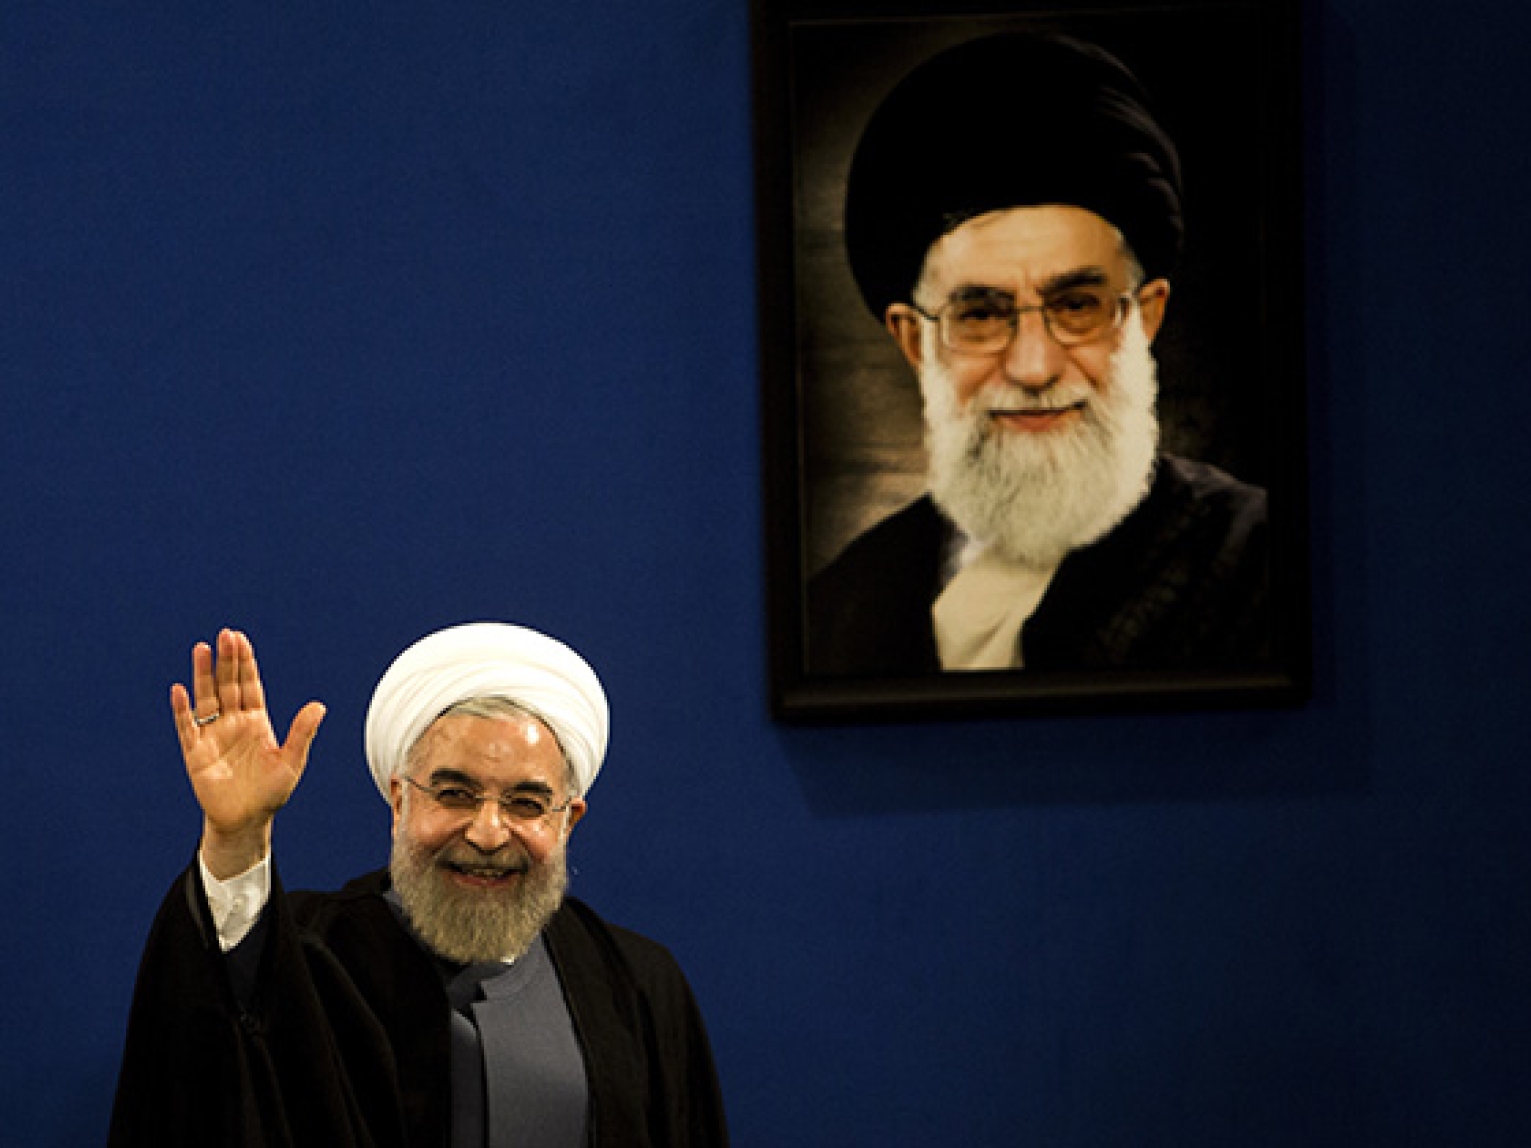 Iranian President Hassan Rouhani waves to journalists next to a portrait of supreme leader Ayatollah Ali Khamenei on June 13, 2015. (Behrouz Mehri/AFP/Getty)